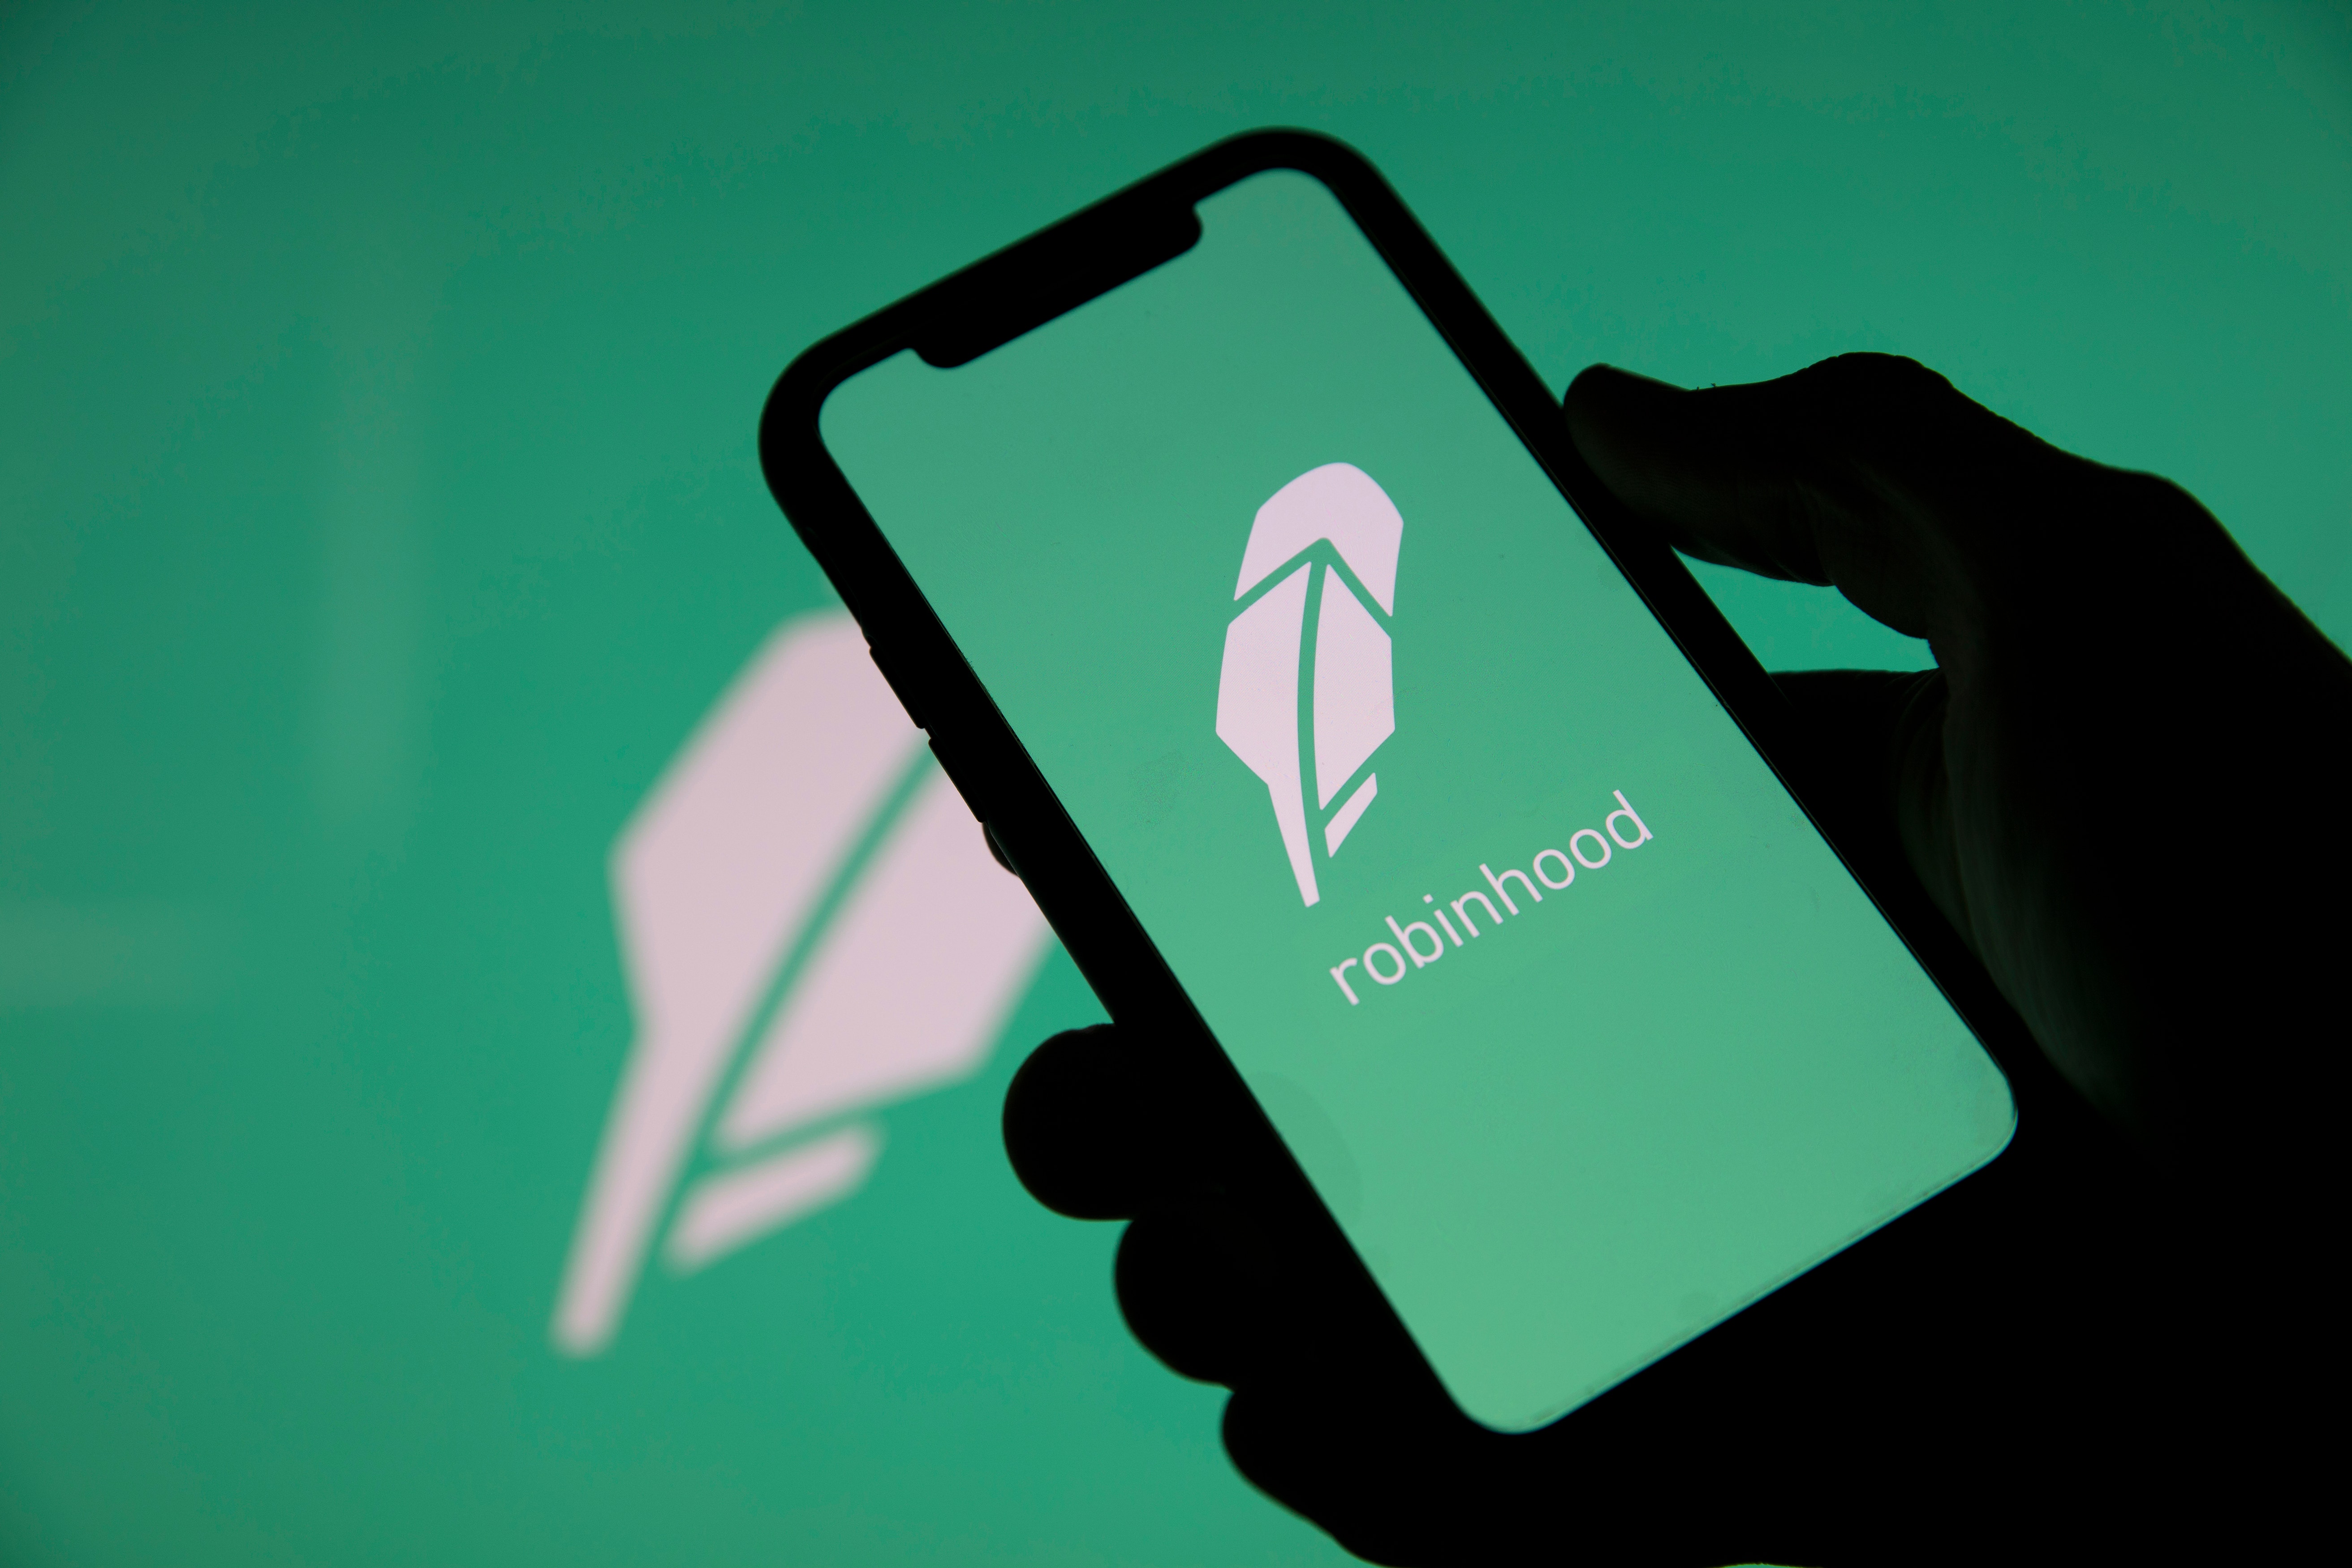 Robinhood Launches Cash Sweep Account — Here's How To Sign Up